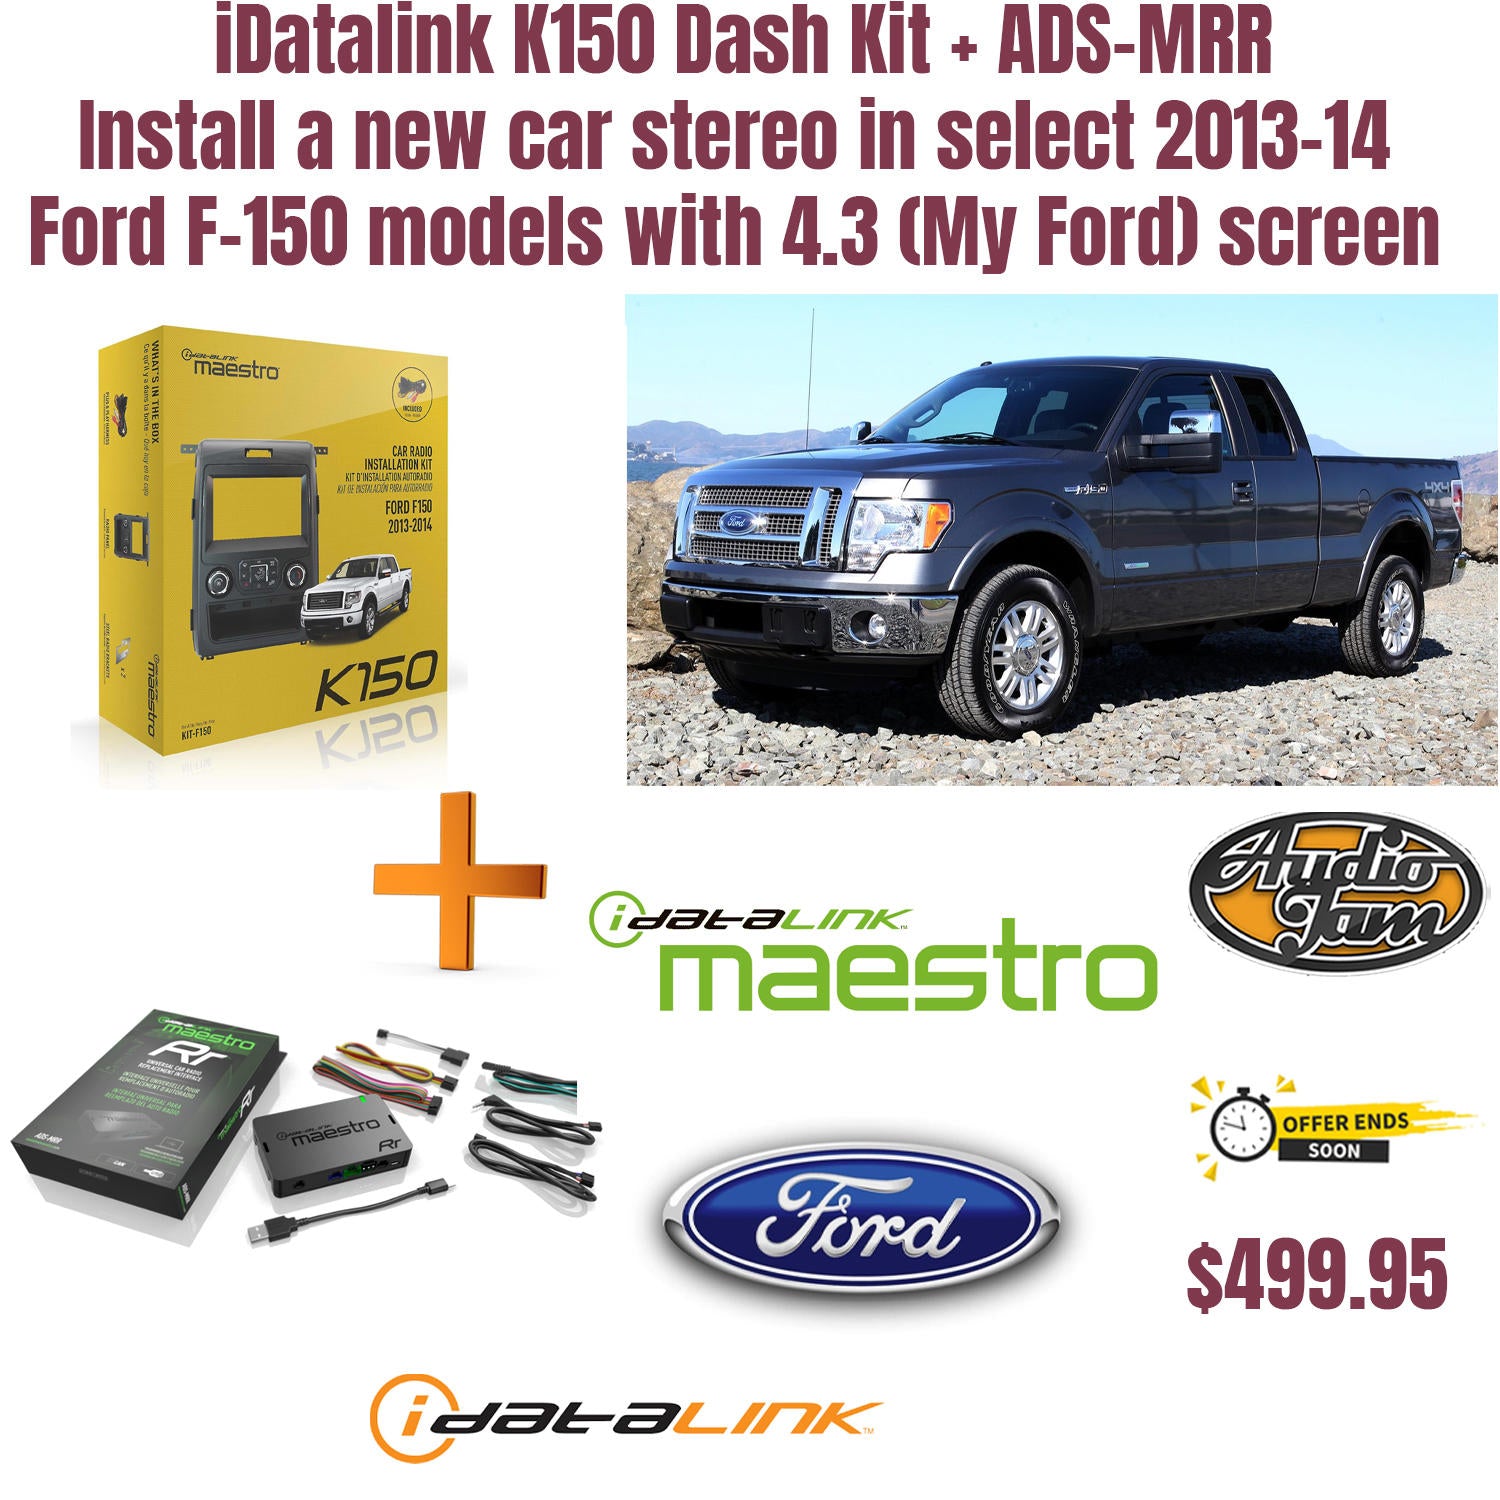 iDatalink K150 Dash Kit + ADS-MRR Install a new car stereo in select 2